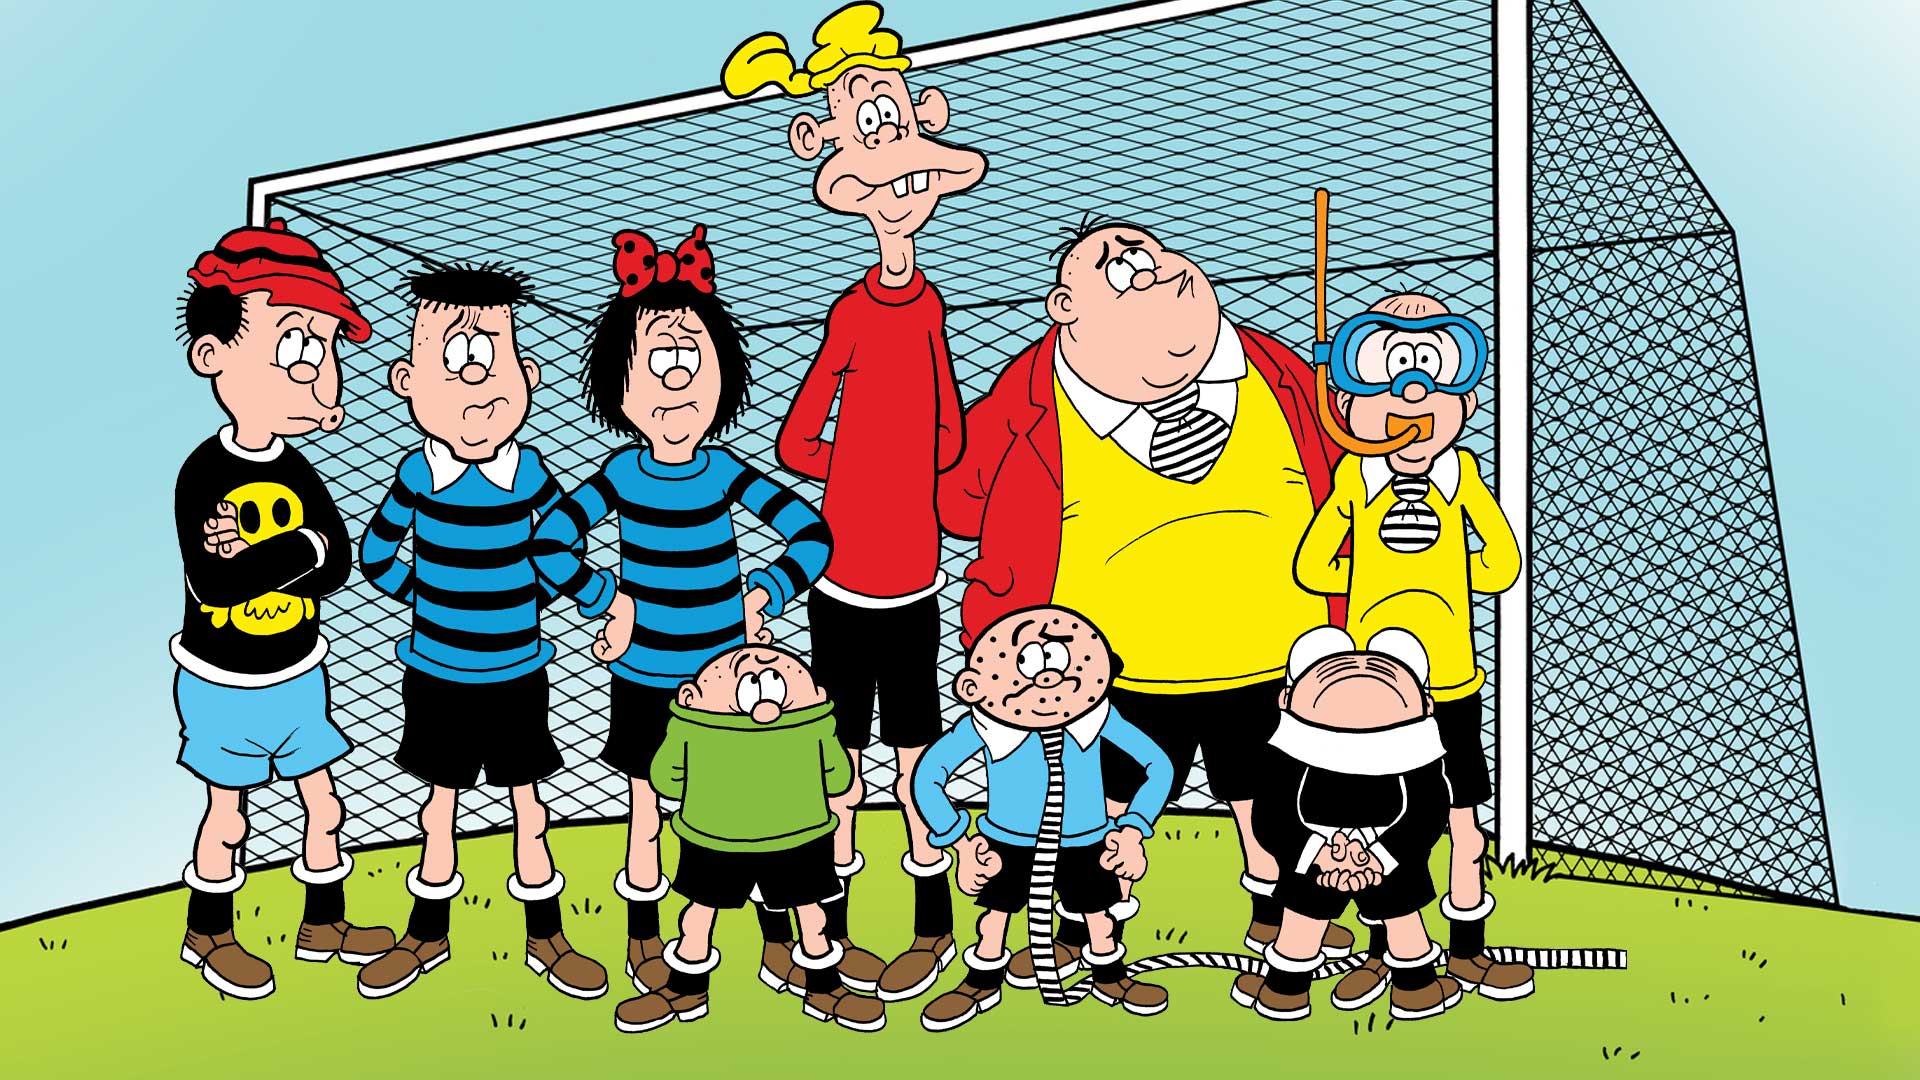 11 Facts You Didn't Know About Beano | Beano.com